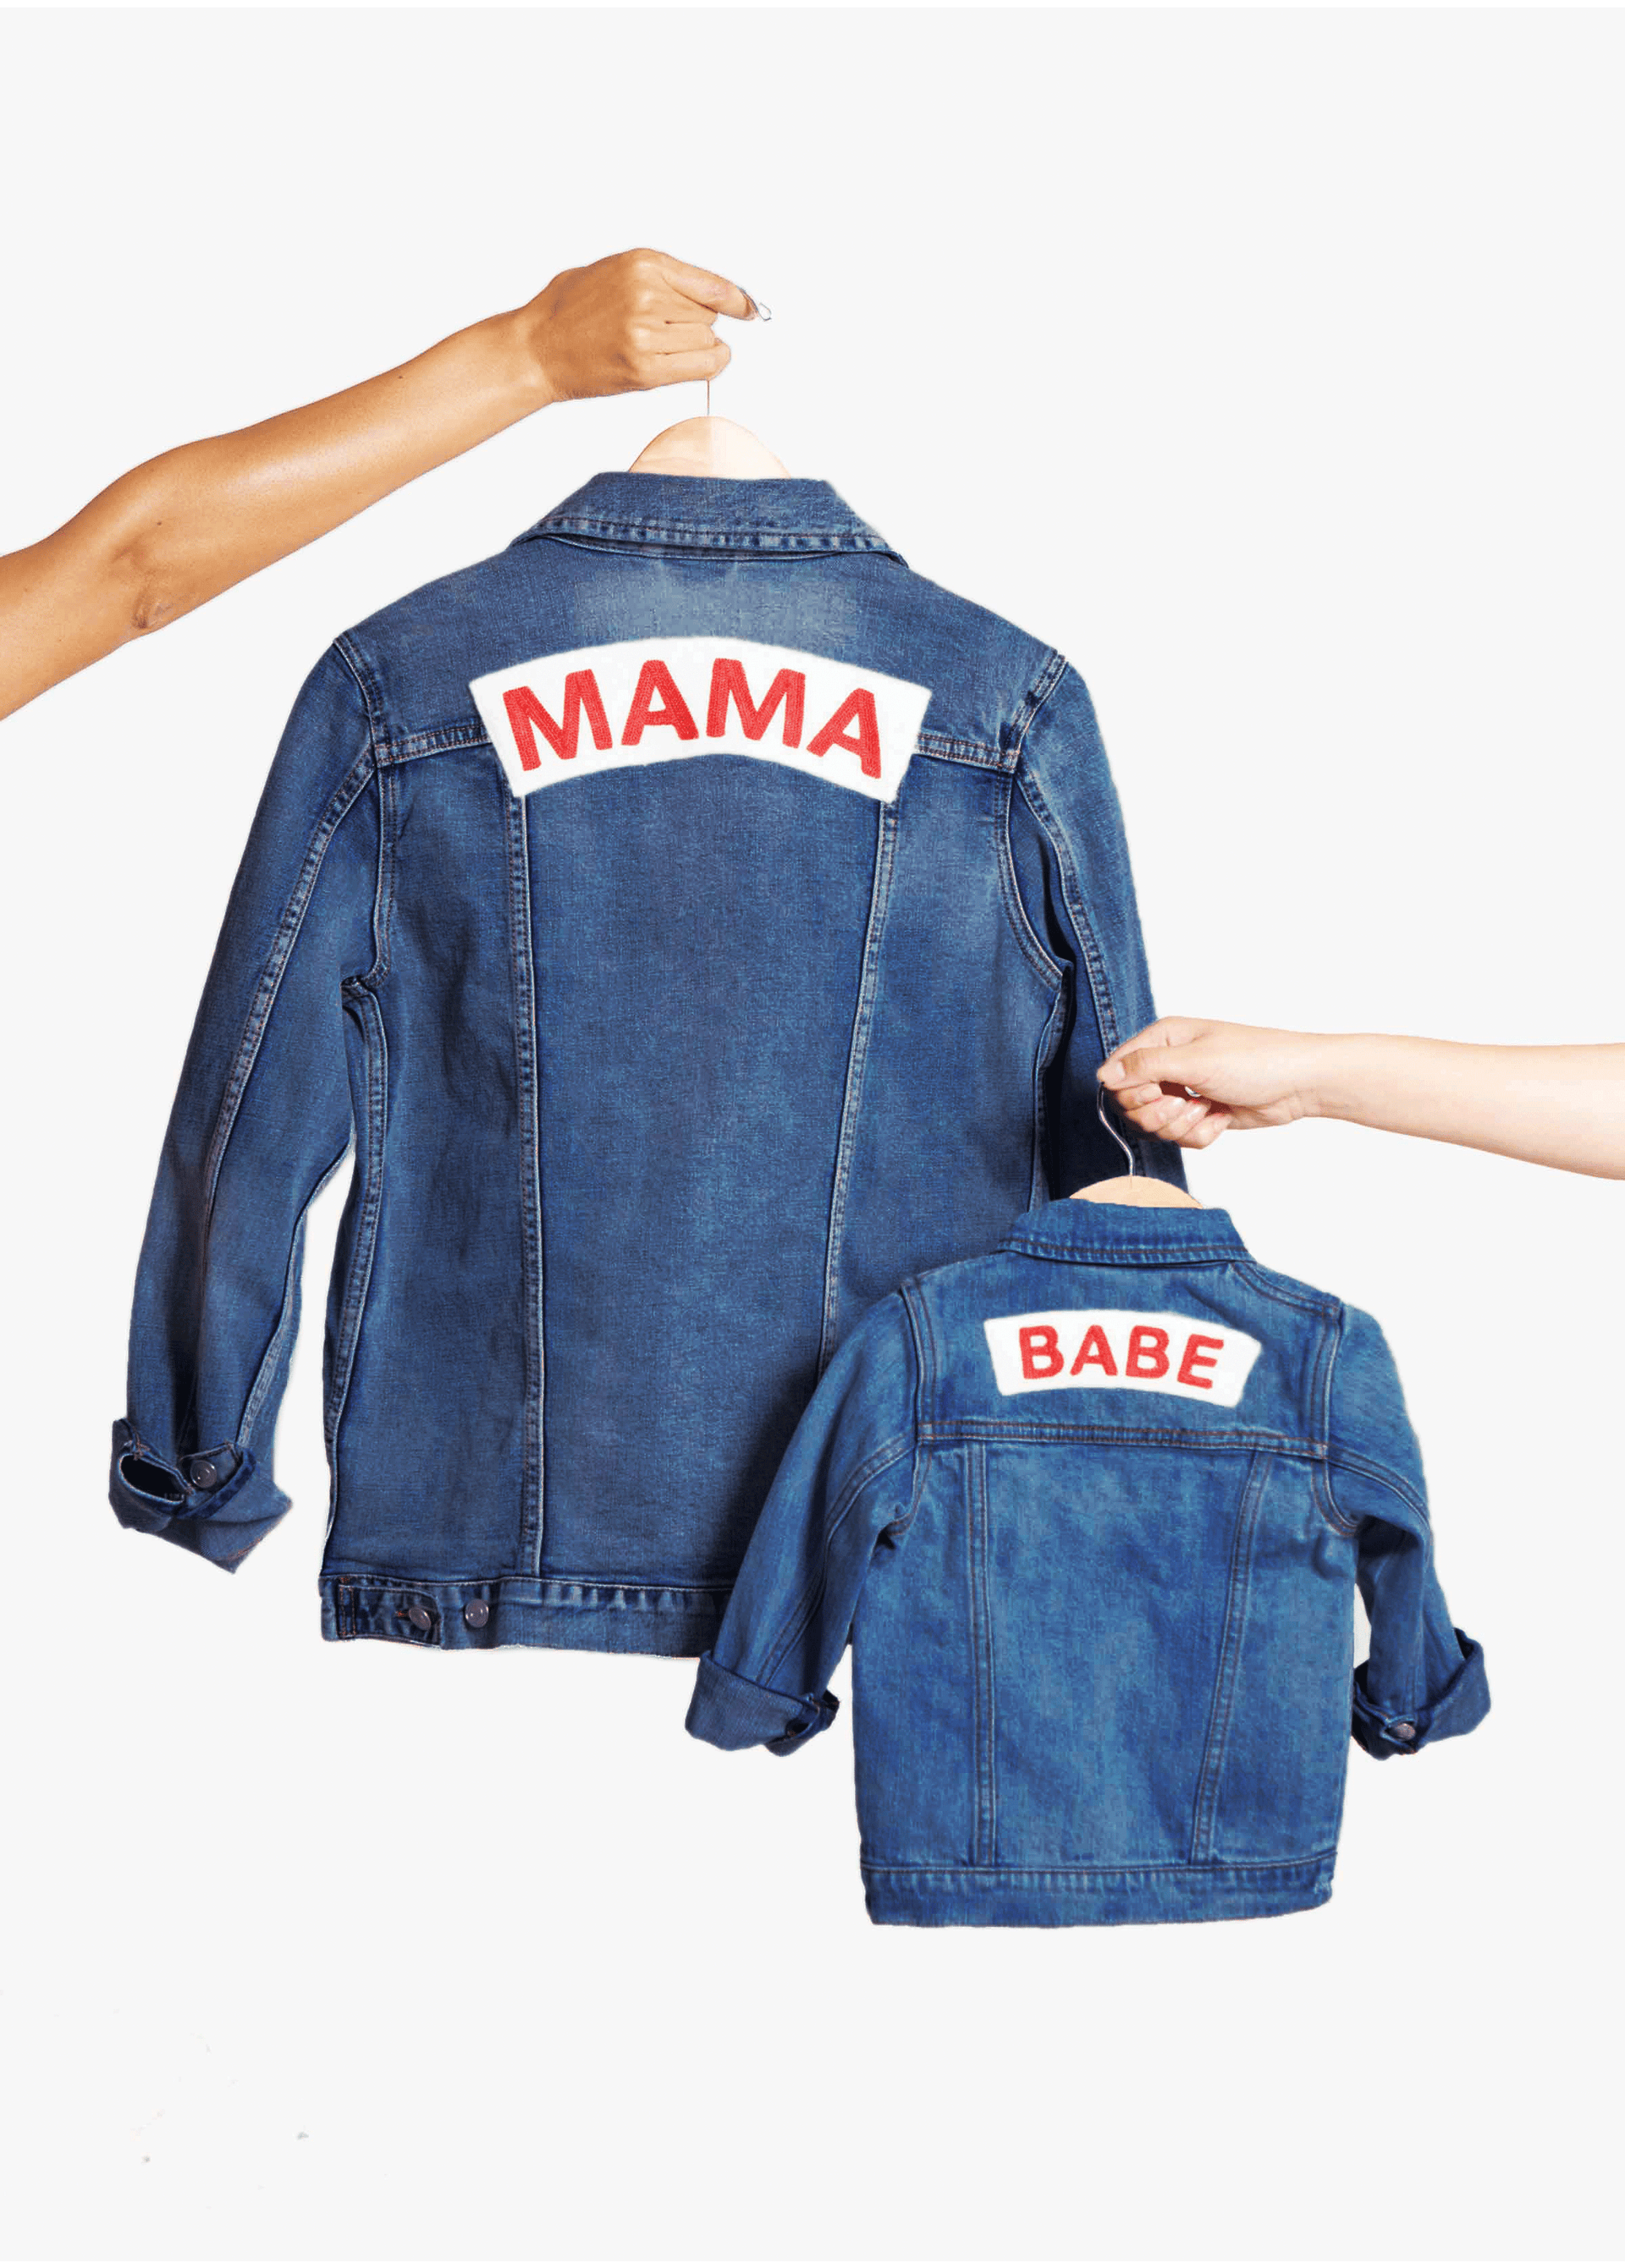 mommy and me jean jackets